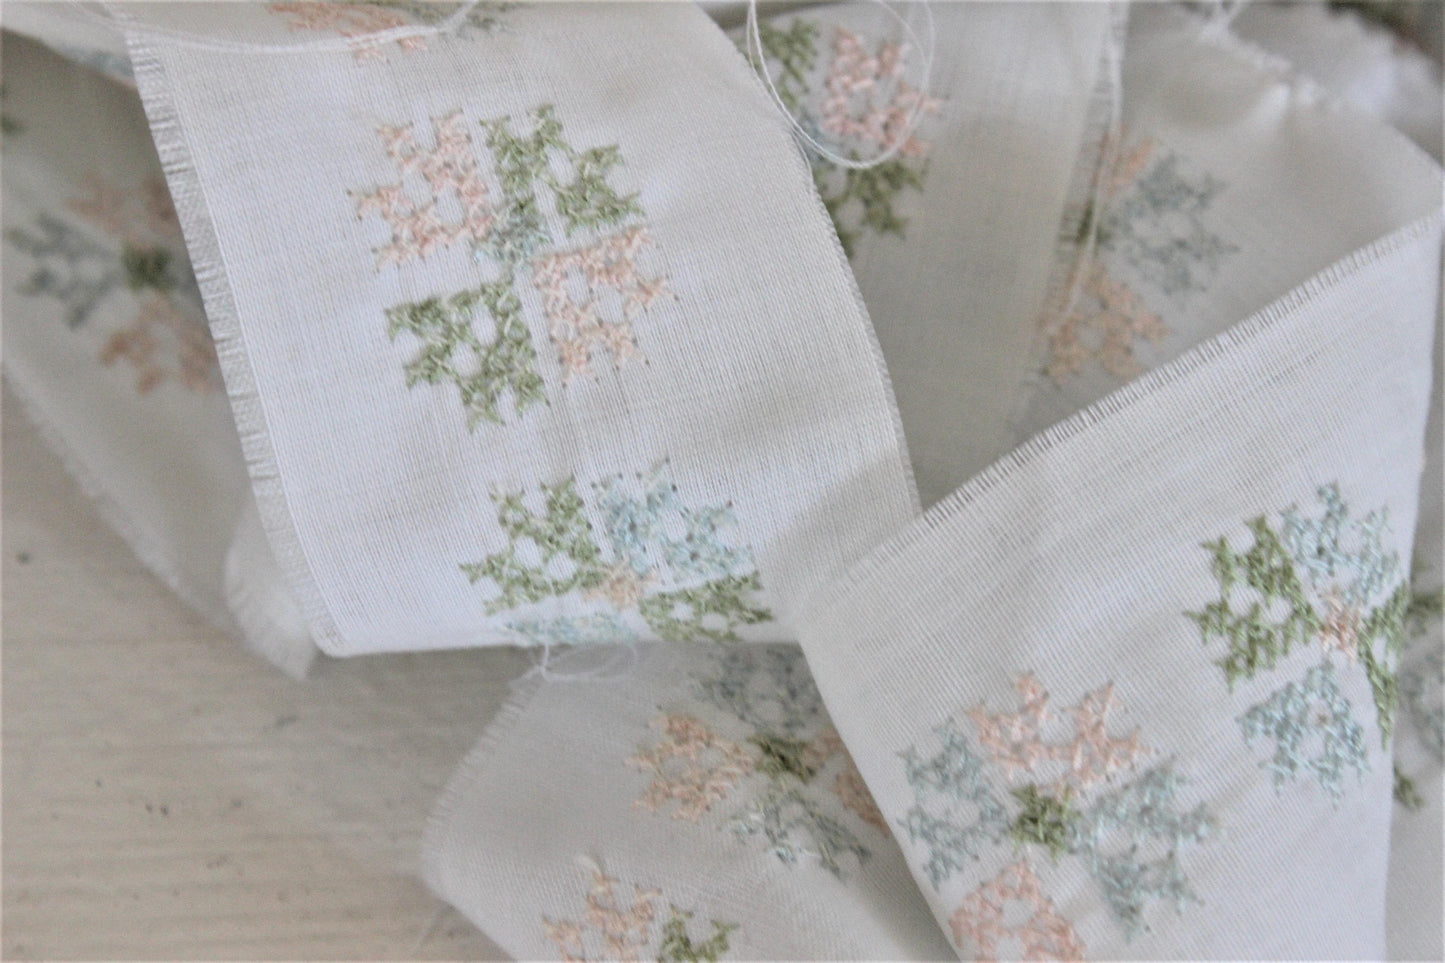 Vintage Floral Trim, Cross-Stitch Embroidery In Blue Pink Green And White